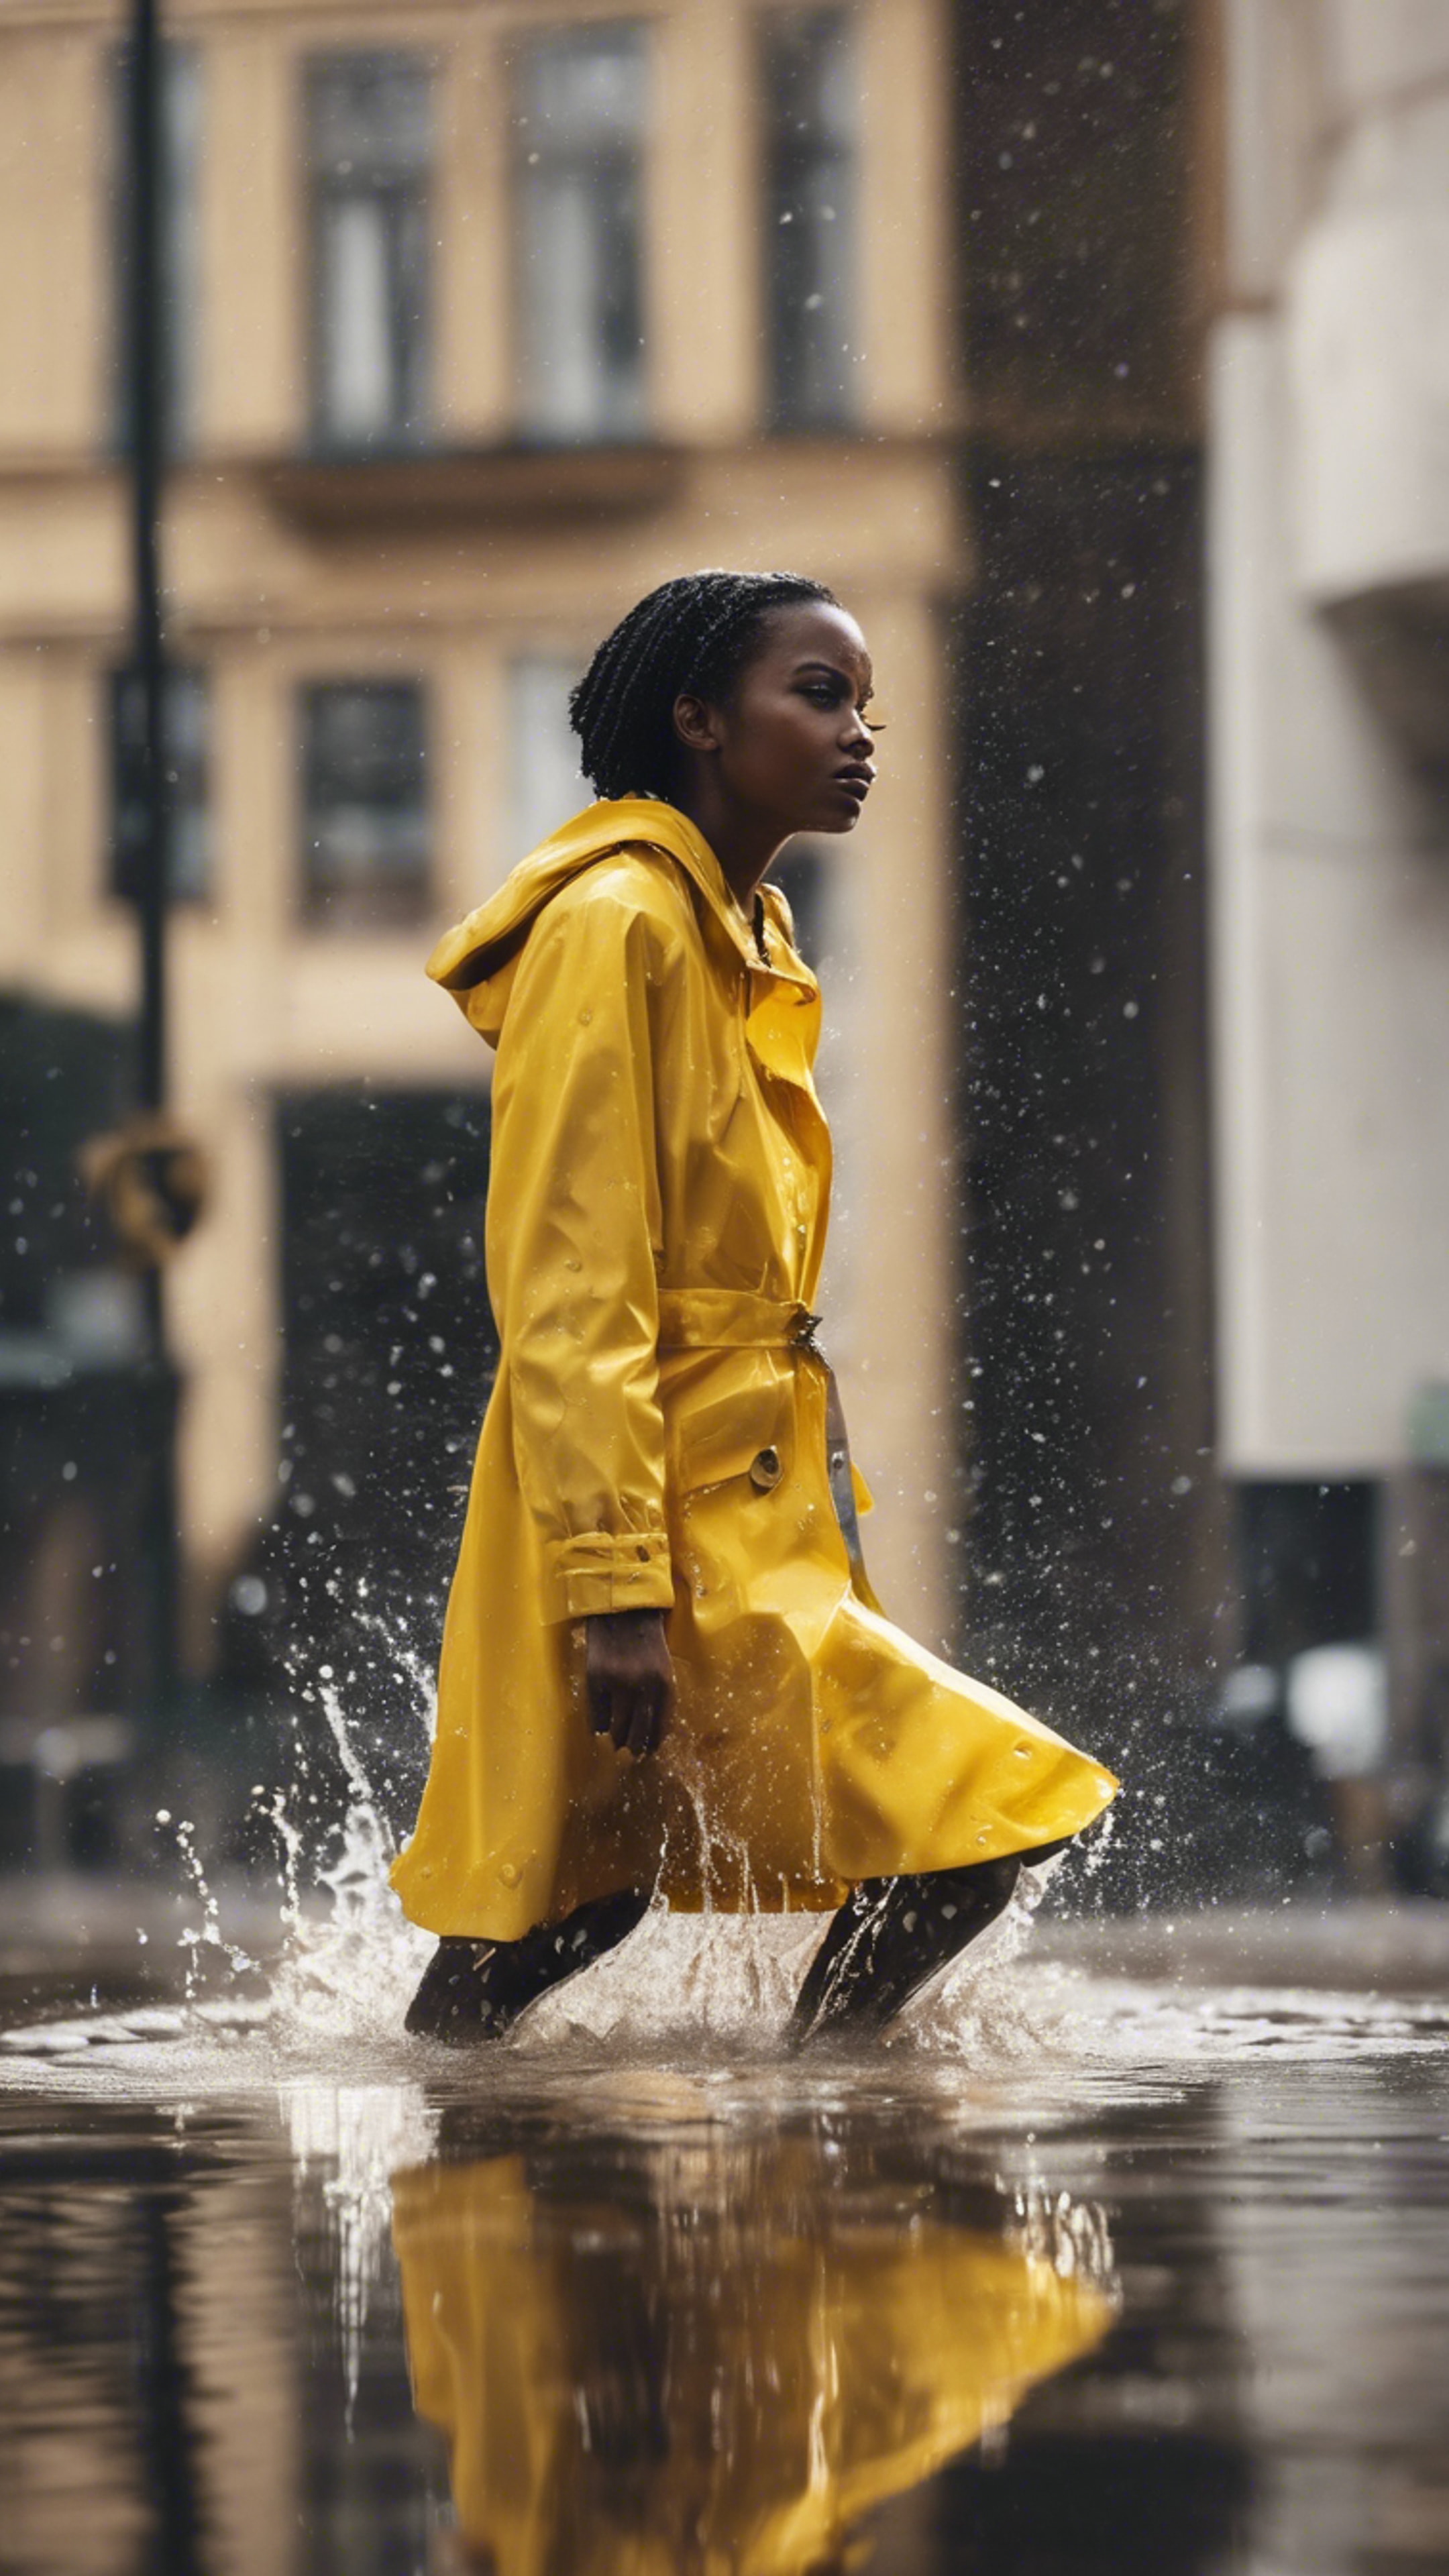 A black girl in a bright yellow raincoat splashing water in puddles after a heavy rain. Валлпапер[a80398e4c066404db875]